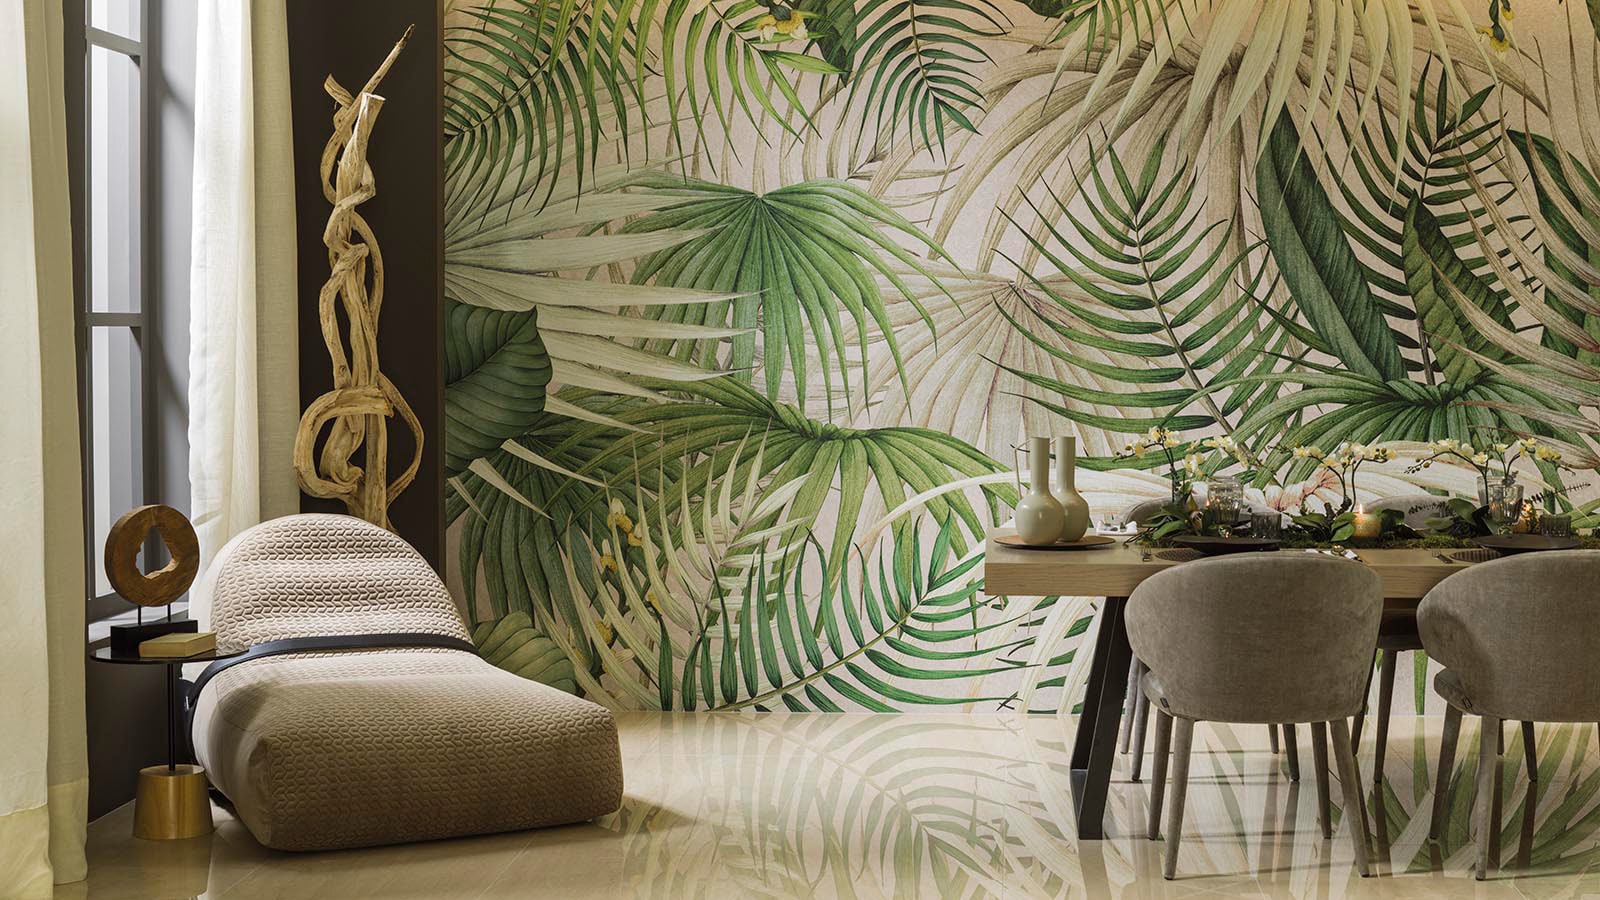 The best of wallpaper in living room décor